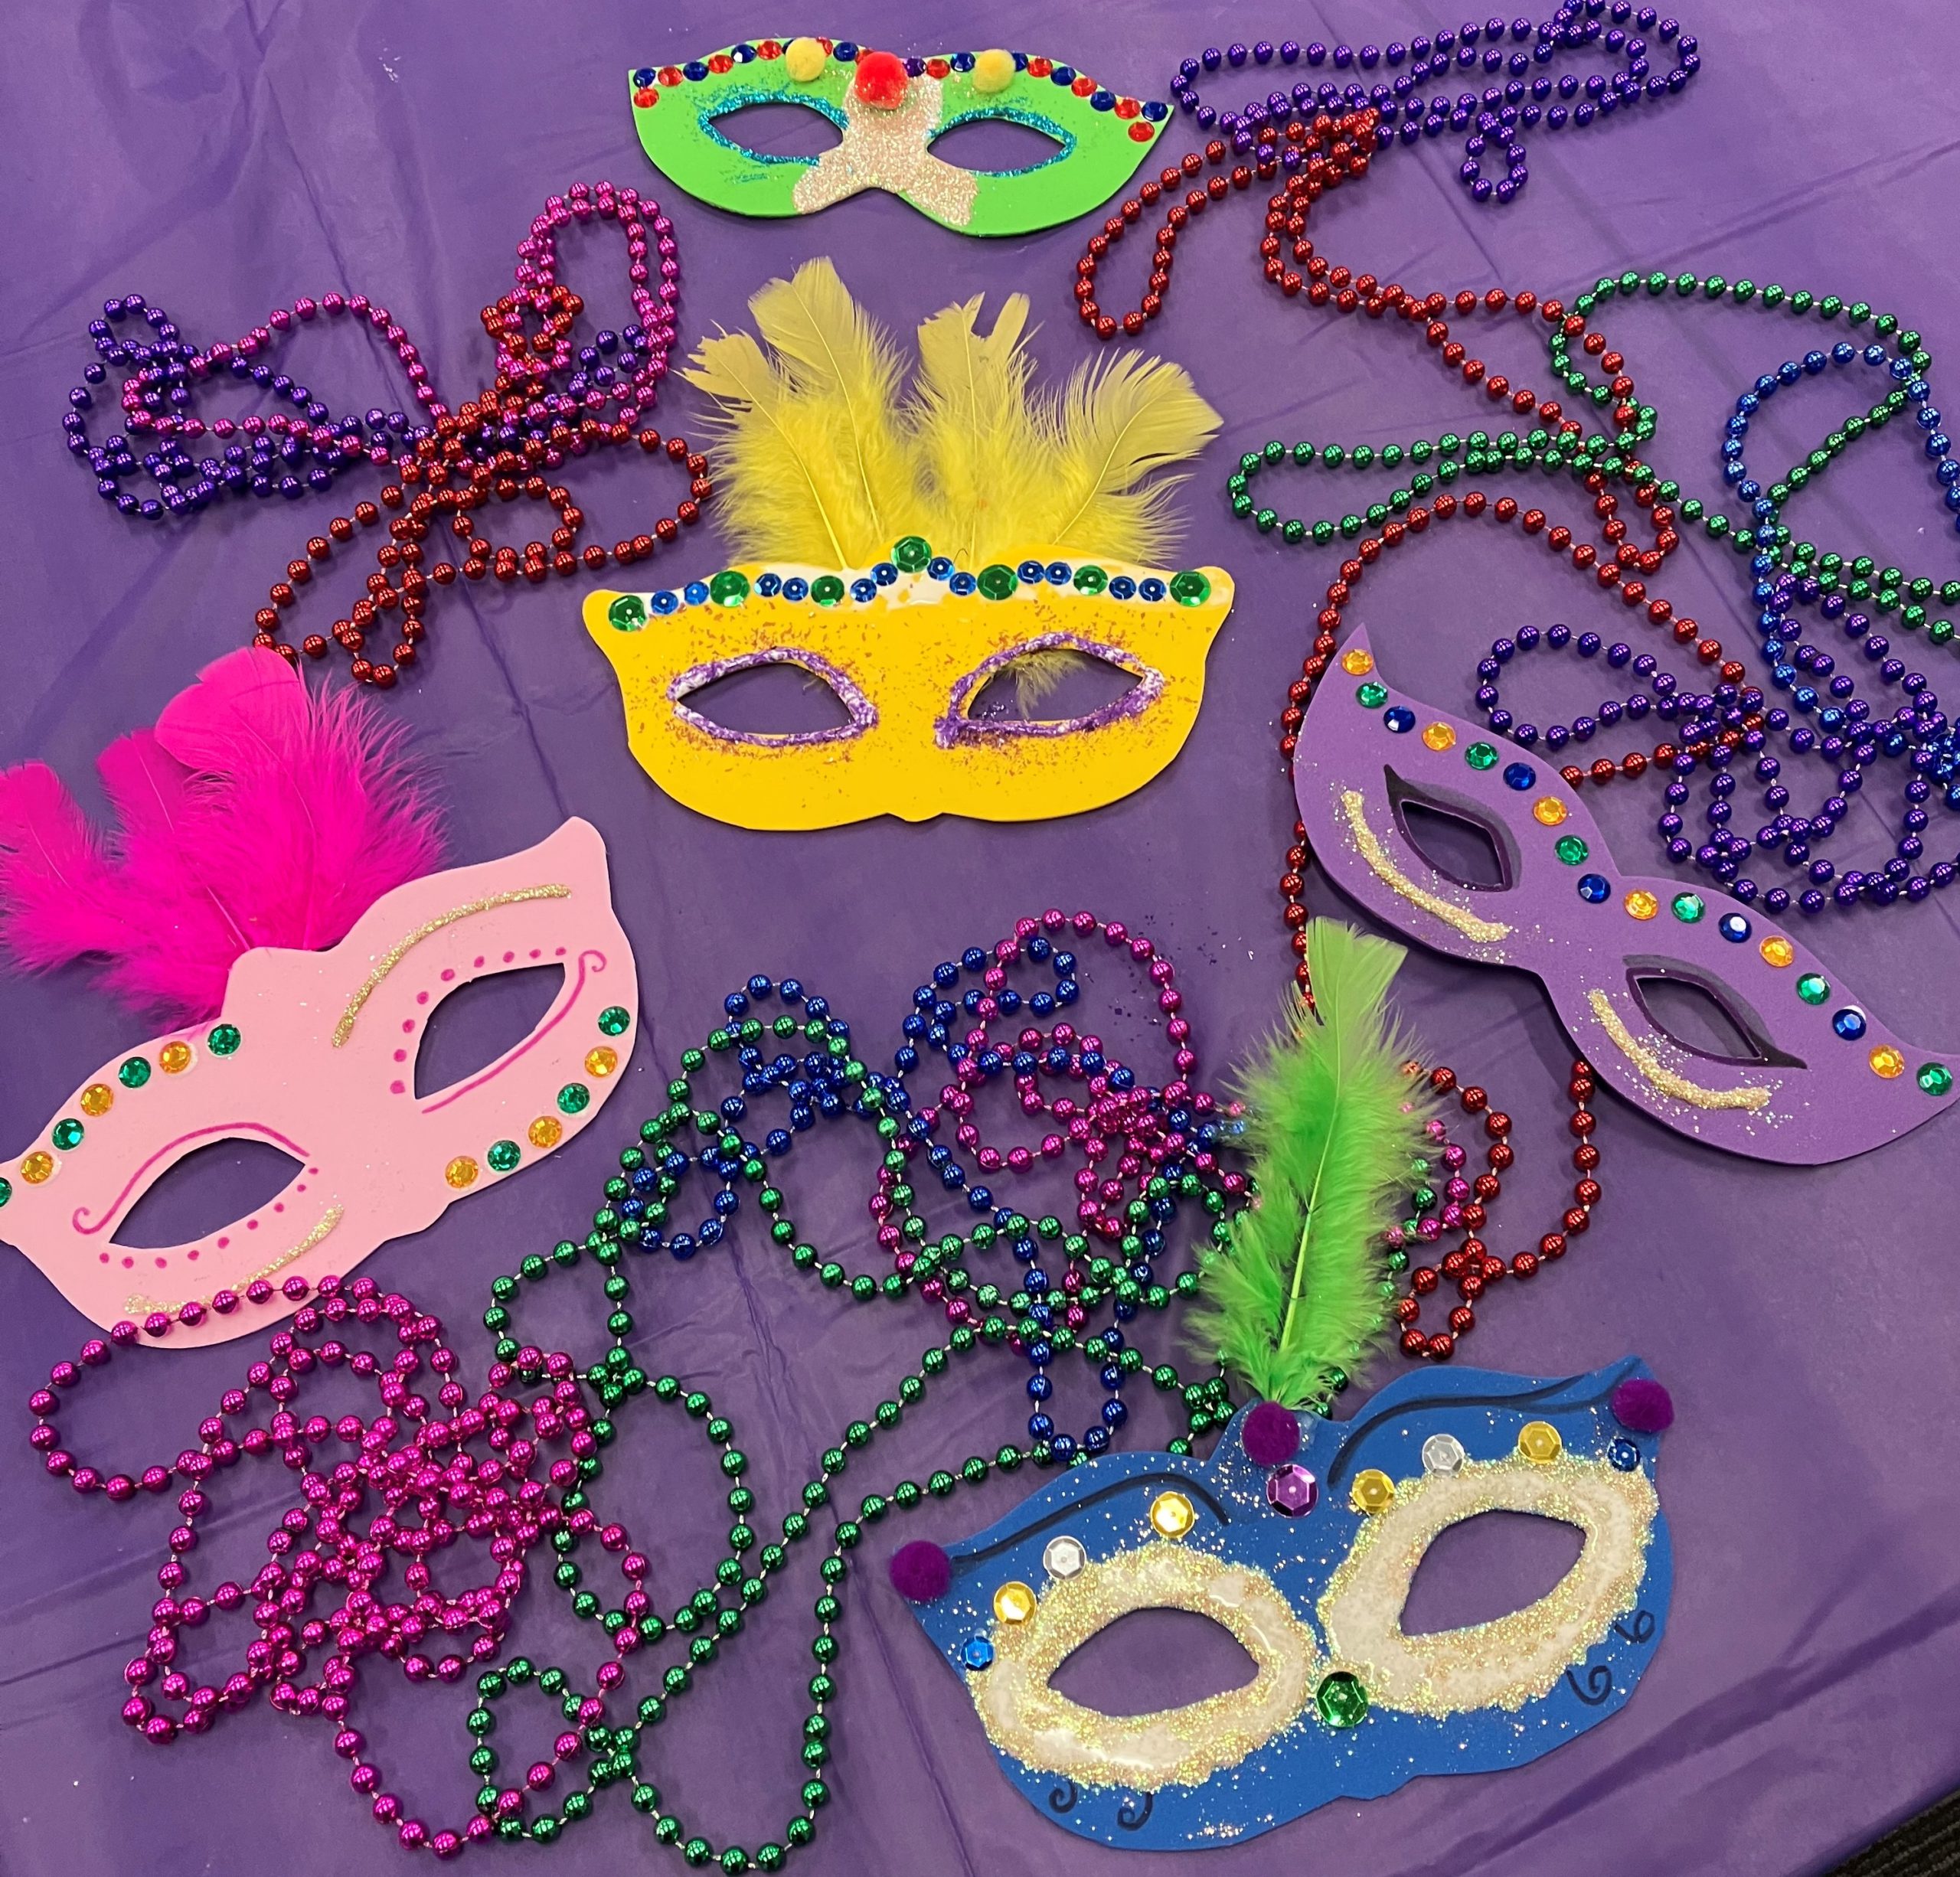 Colorful paper masks and Mardi Gras beads on a purple tablecloth